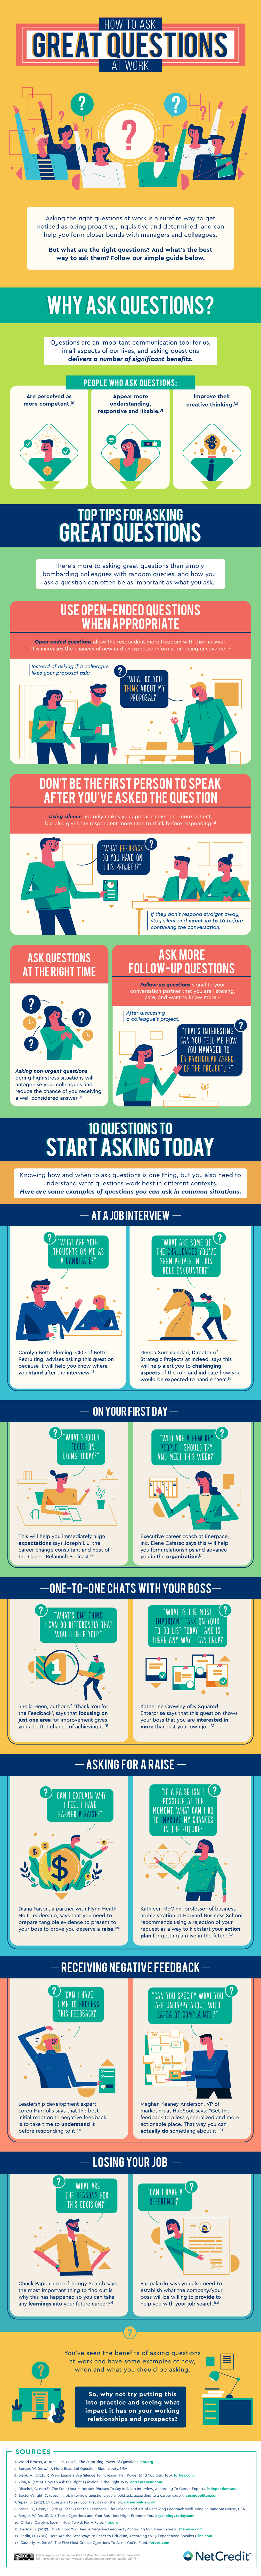 This infographic highlights how to ask great questions at work